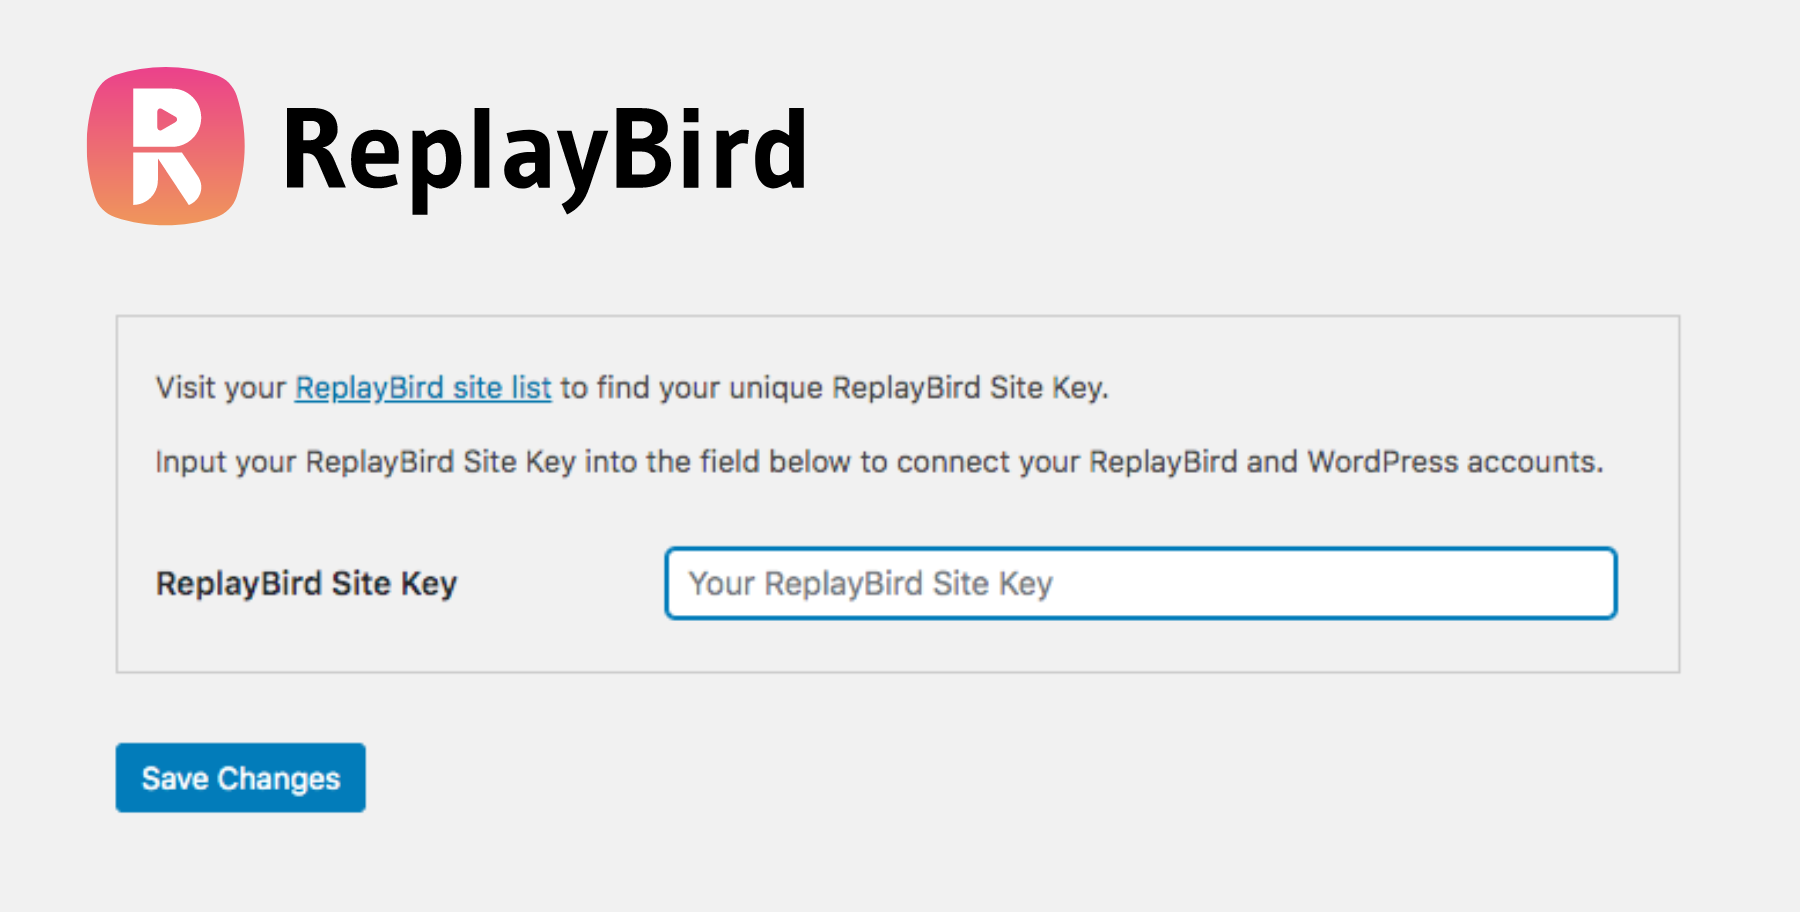 Add your unique ReplayBird Site Key in the settings, and Save Changes to install the ReplayBird script for that site.